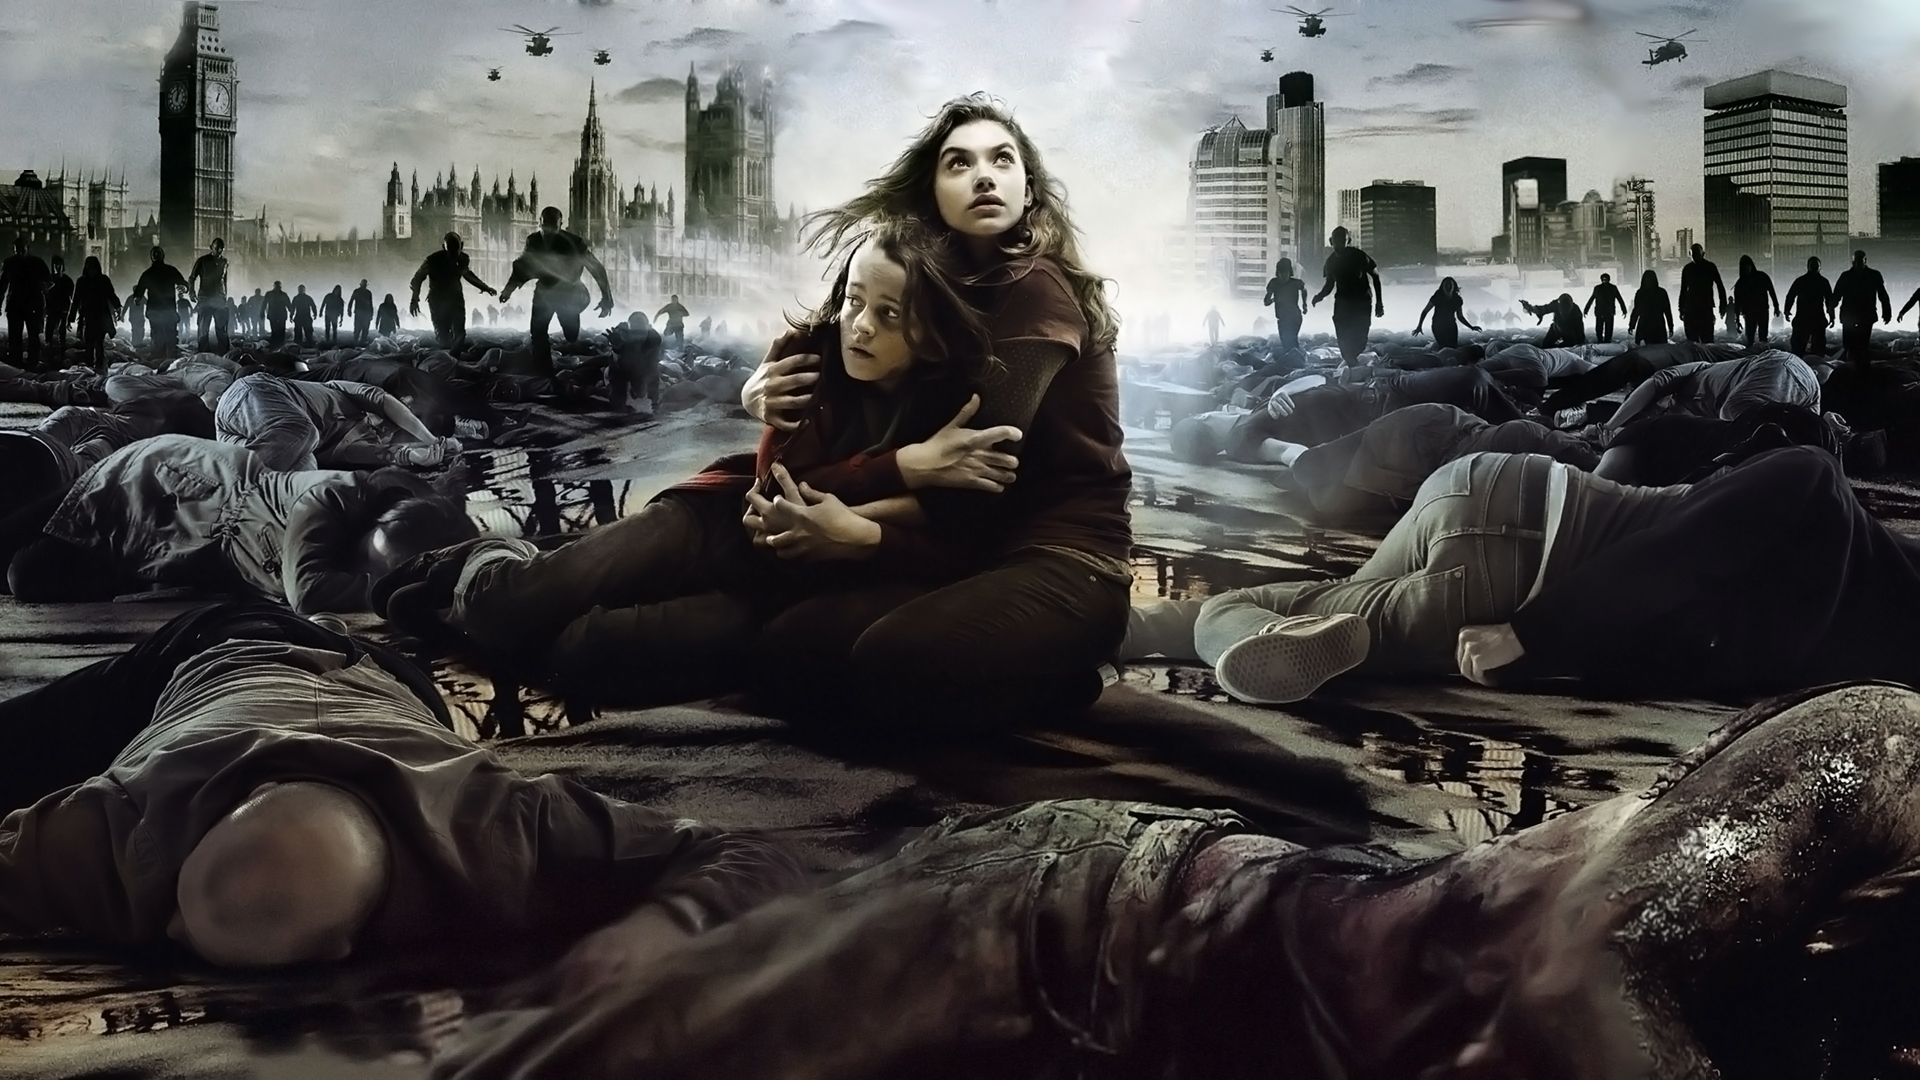 Later Zombies Alone City Hopelessness Full HD 1080p Background